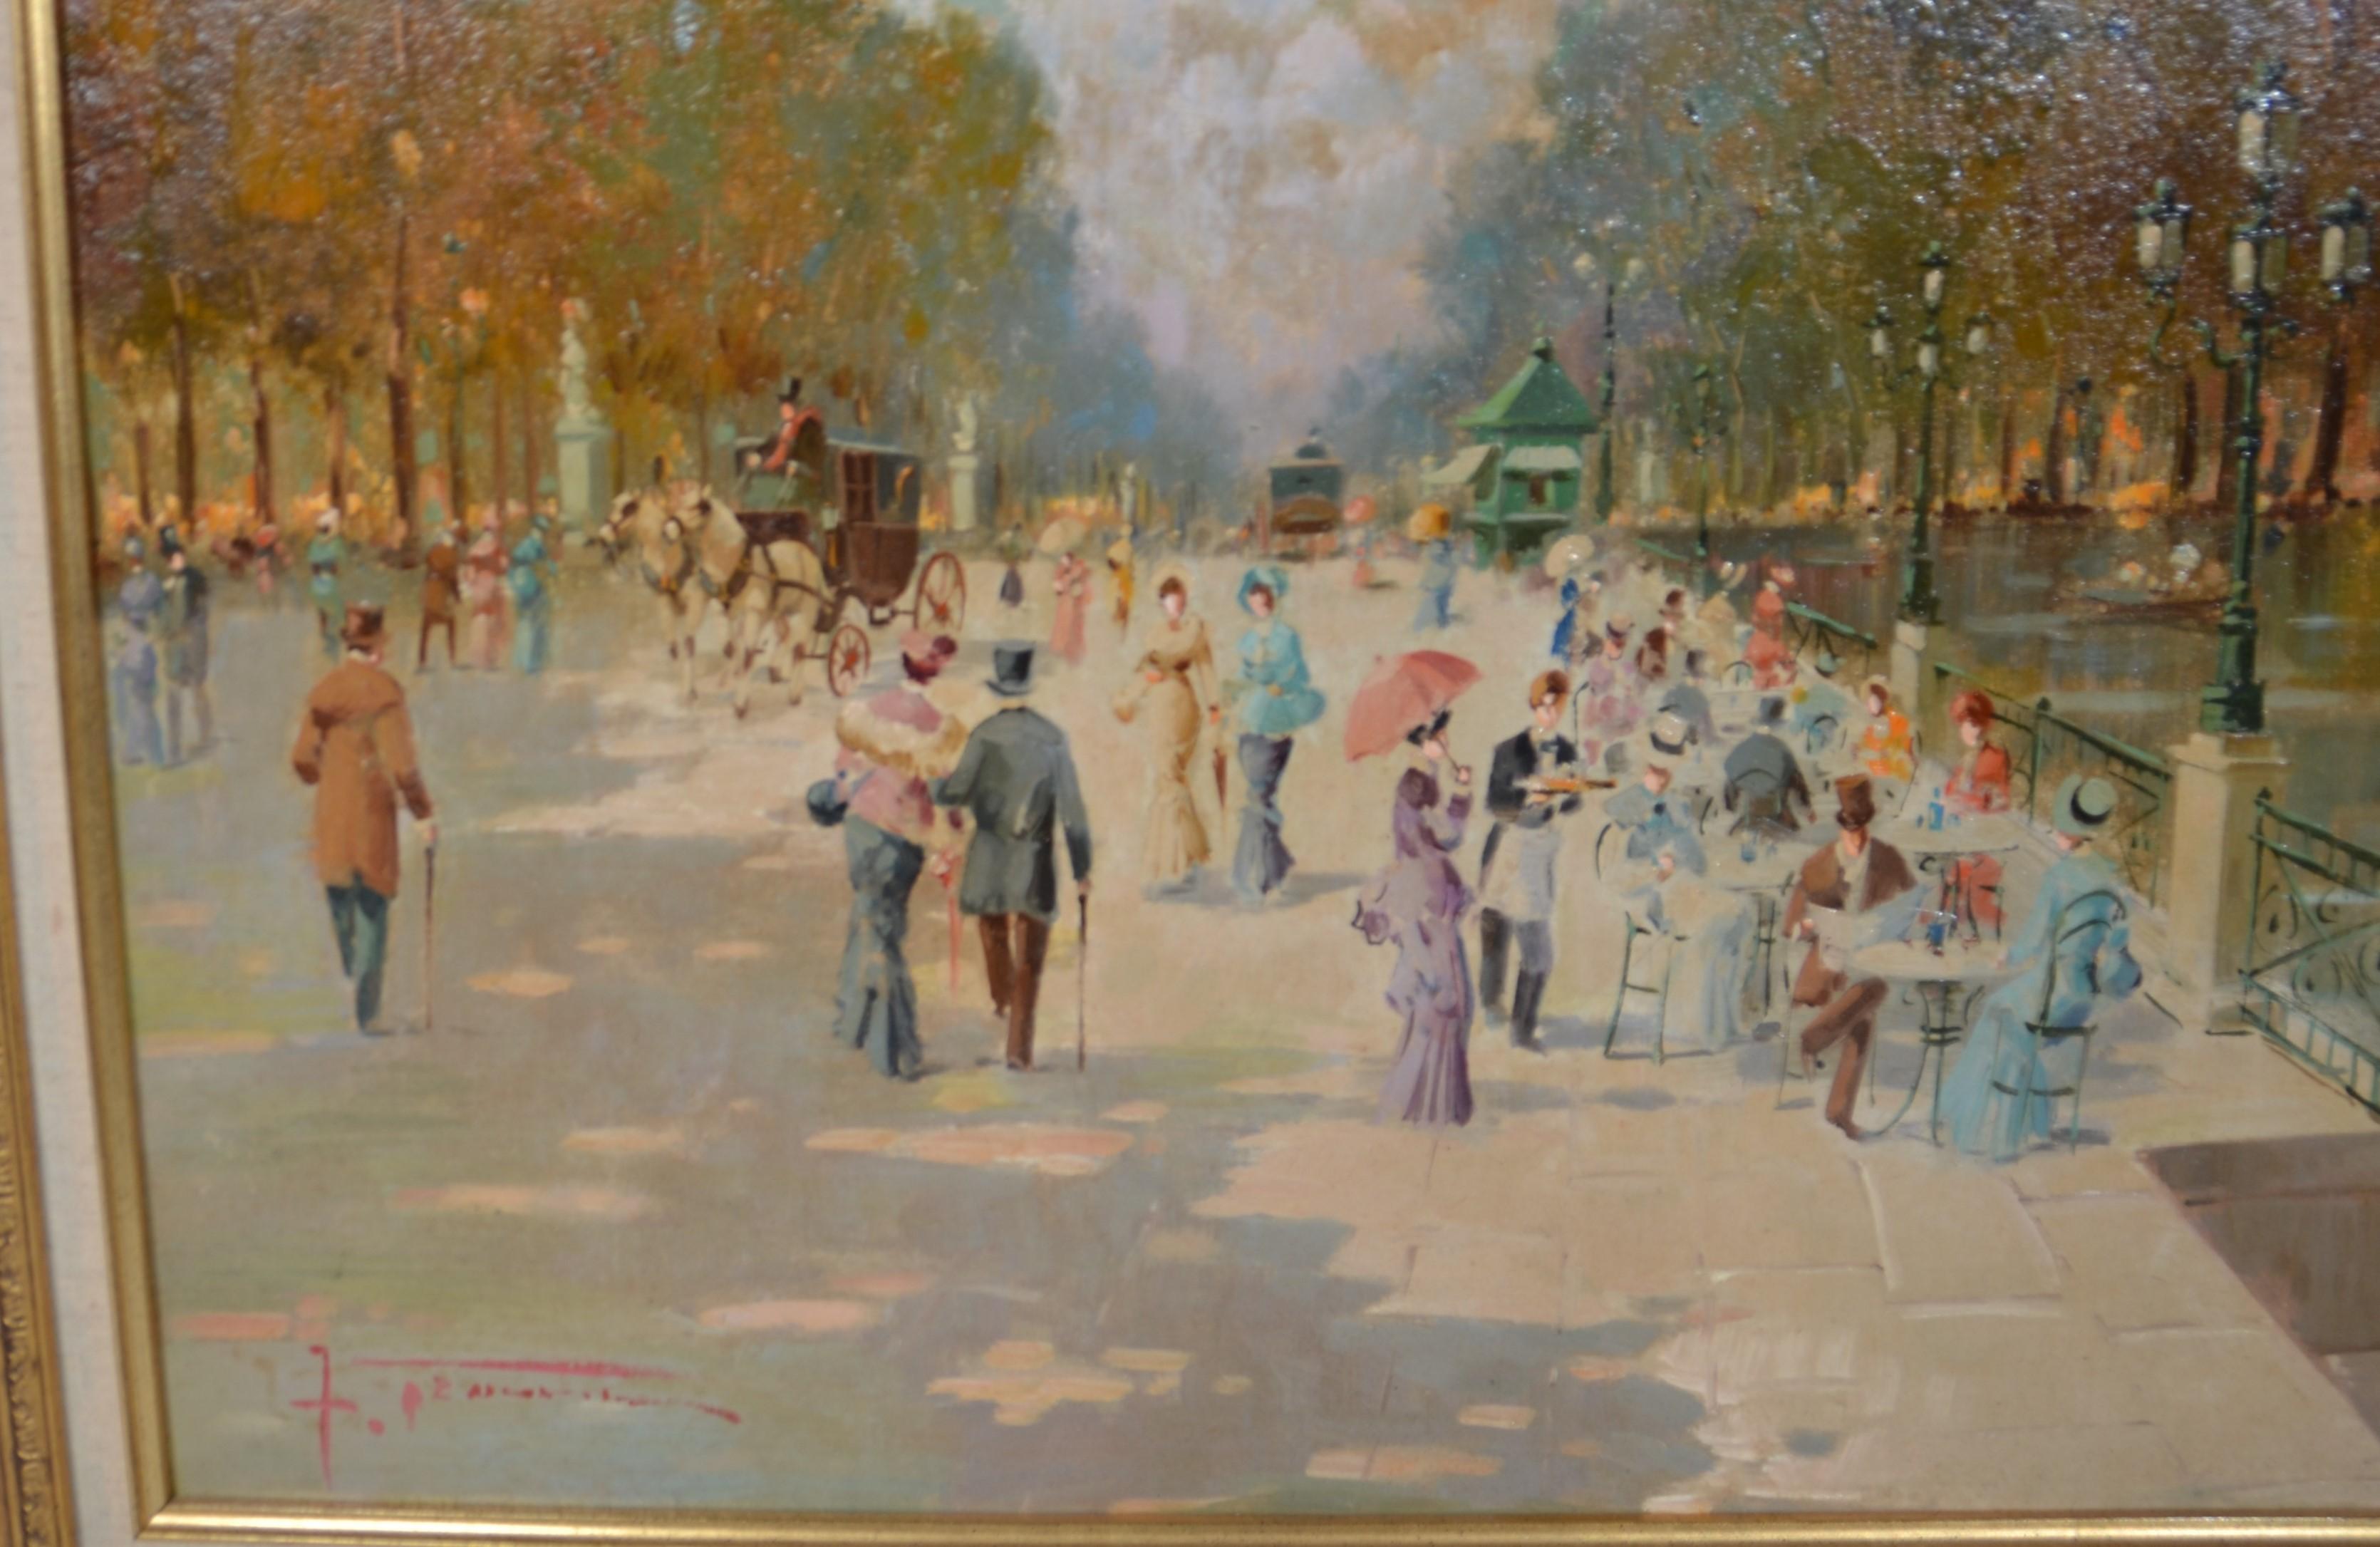 A large oil on canvas painting of a Riverbank scene. Great detail and color. Illegible title and signature verso and signed bottom left on the painting. Probably a Sunday scene of Paris showing elegantly dressed people enjoying their leisure time by